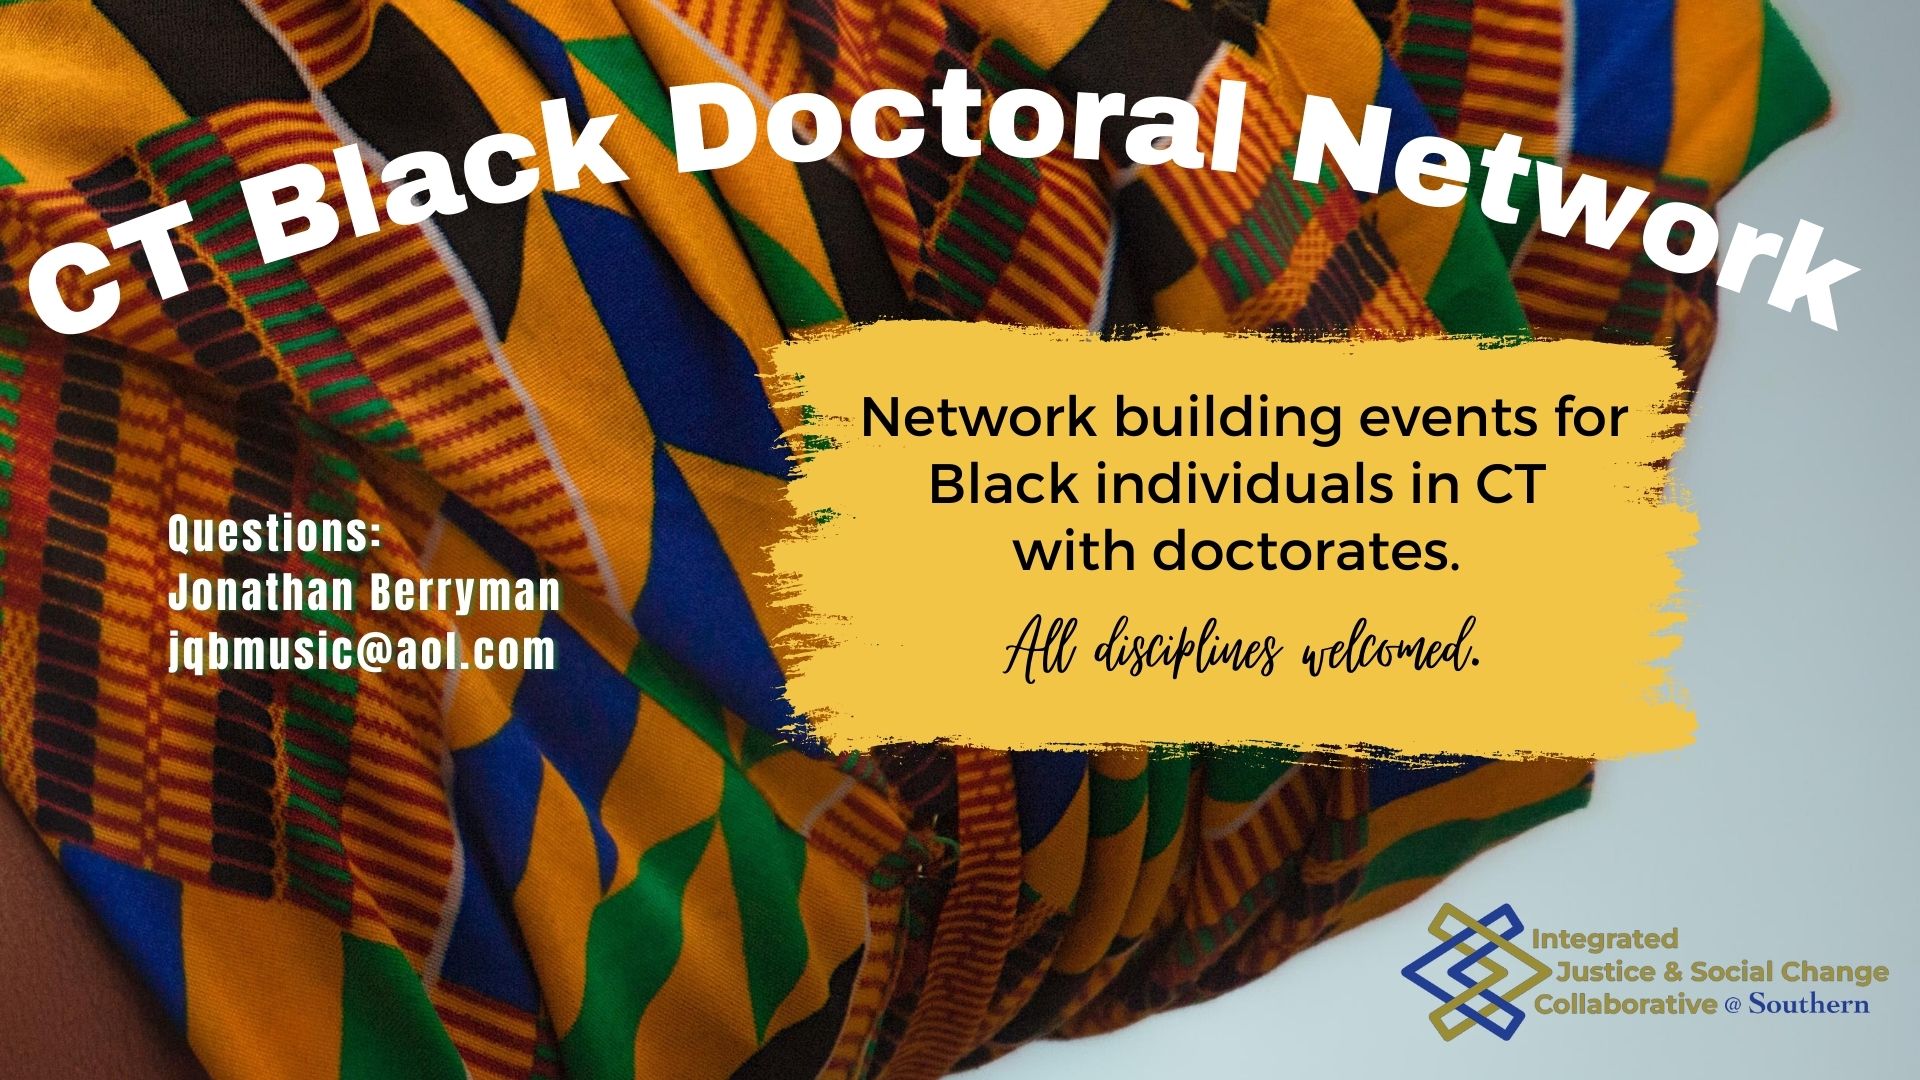 CT Black Doctoral Network Image of Kente cloth and words inviting people to participate